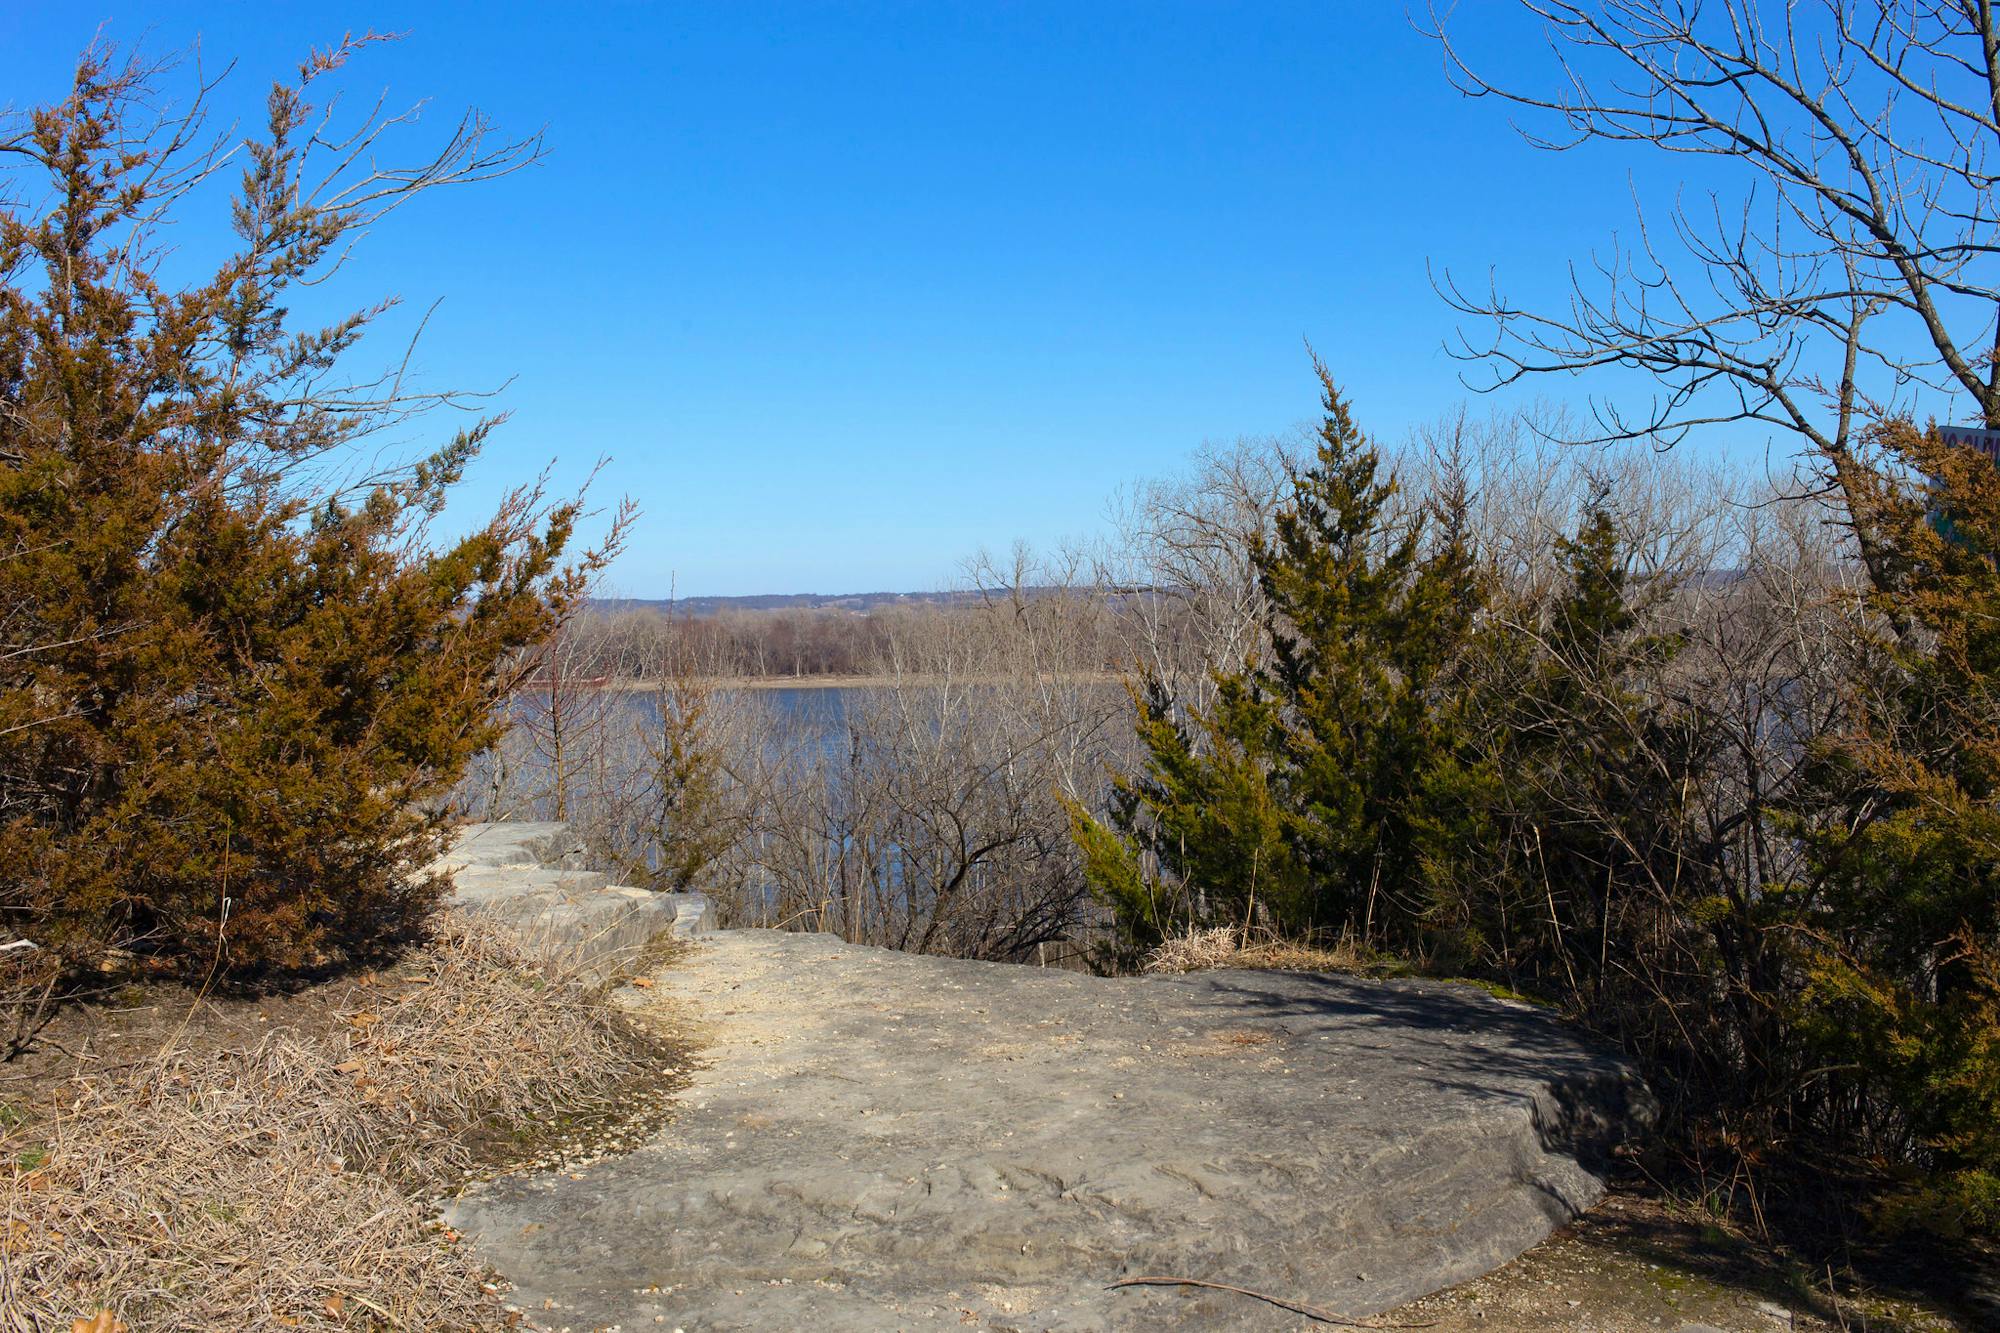 Atop the bluffs in Cliff Cave County Park